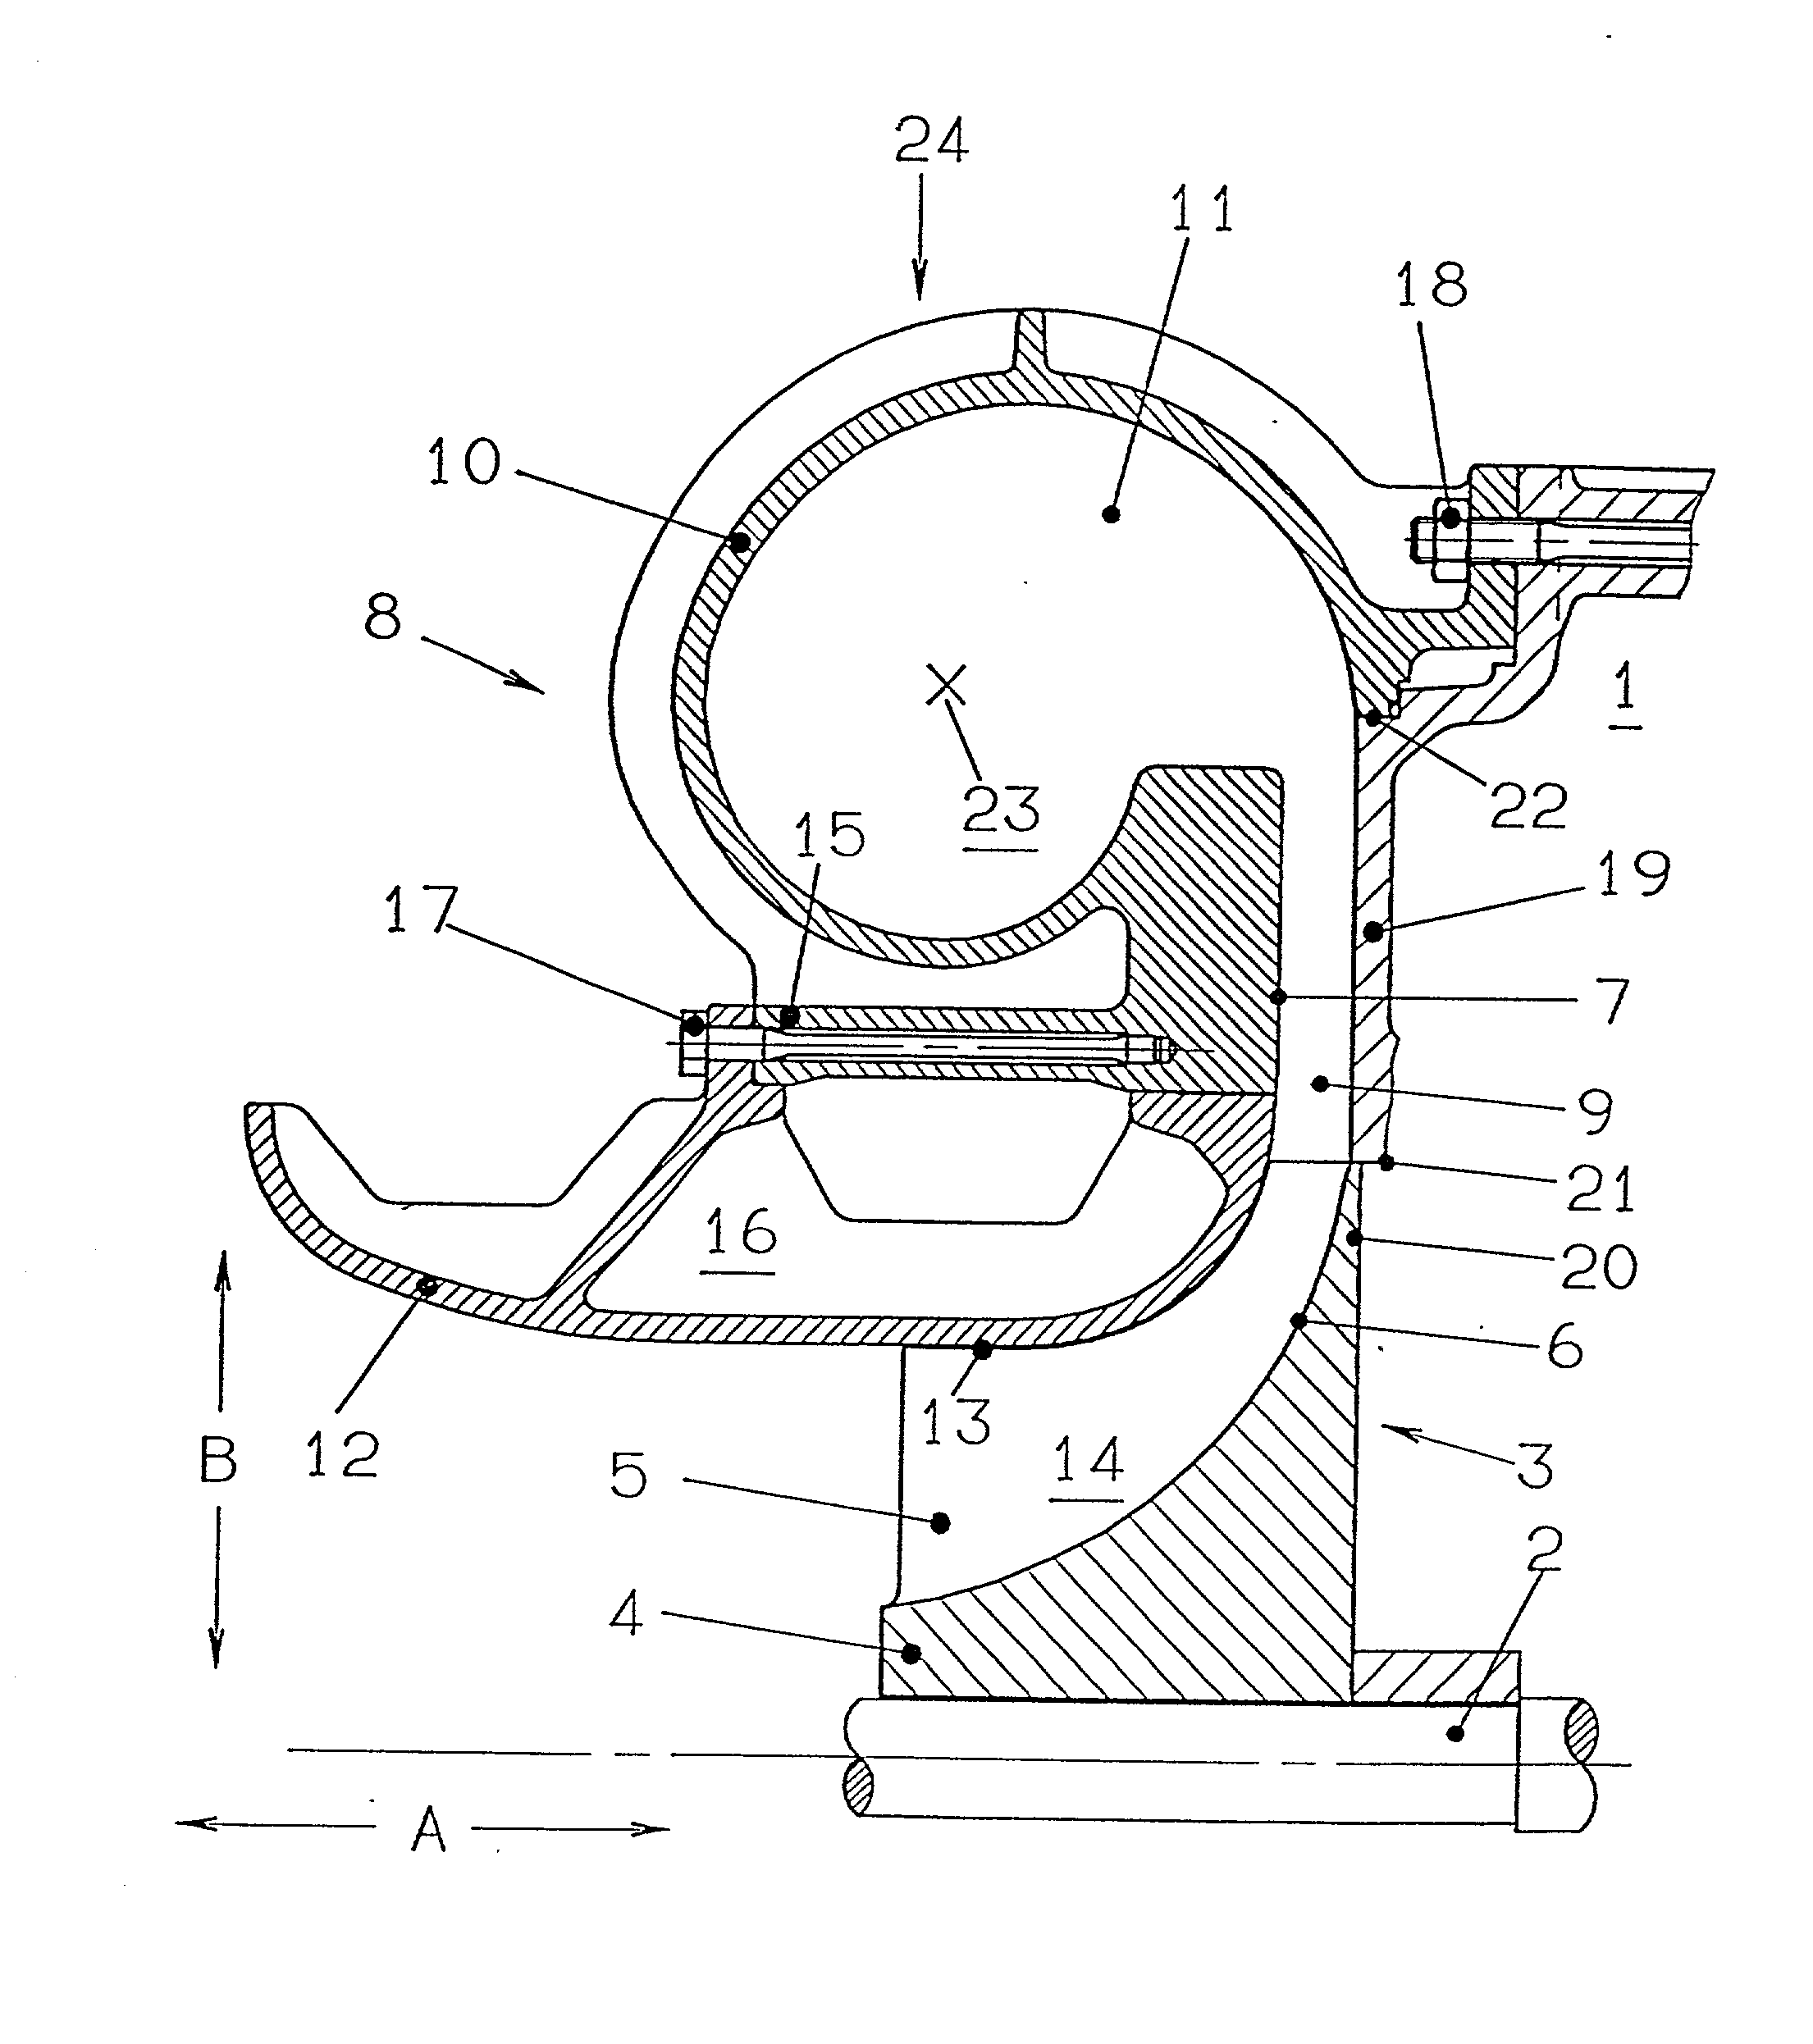 Turbomachine with radial-flow compressor impeller